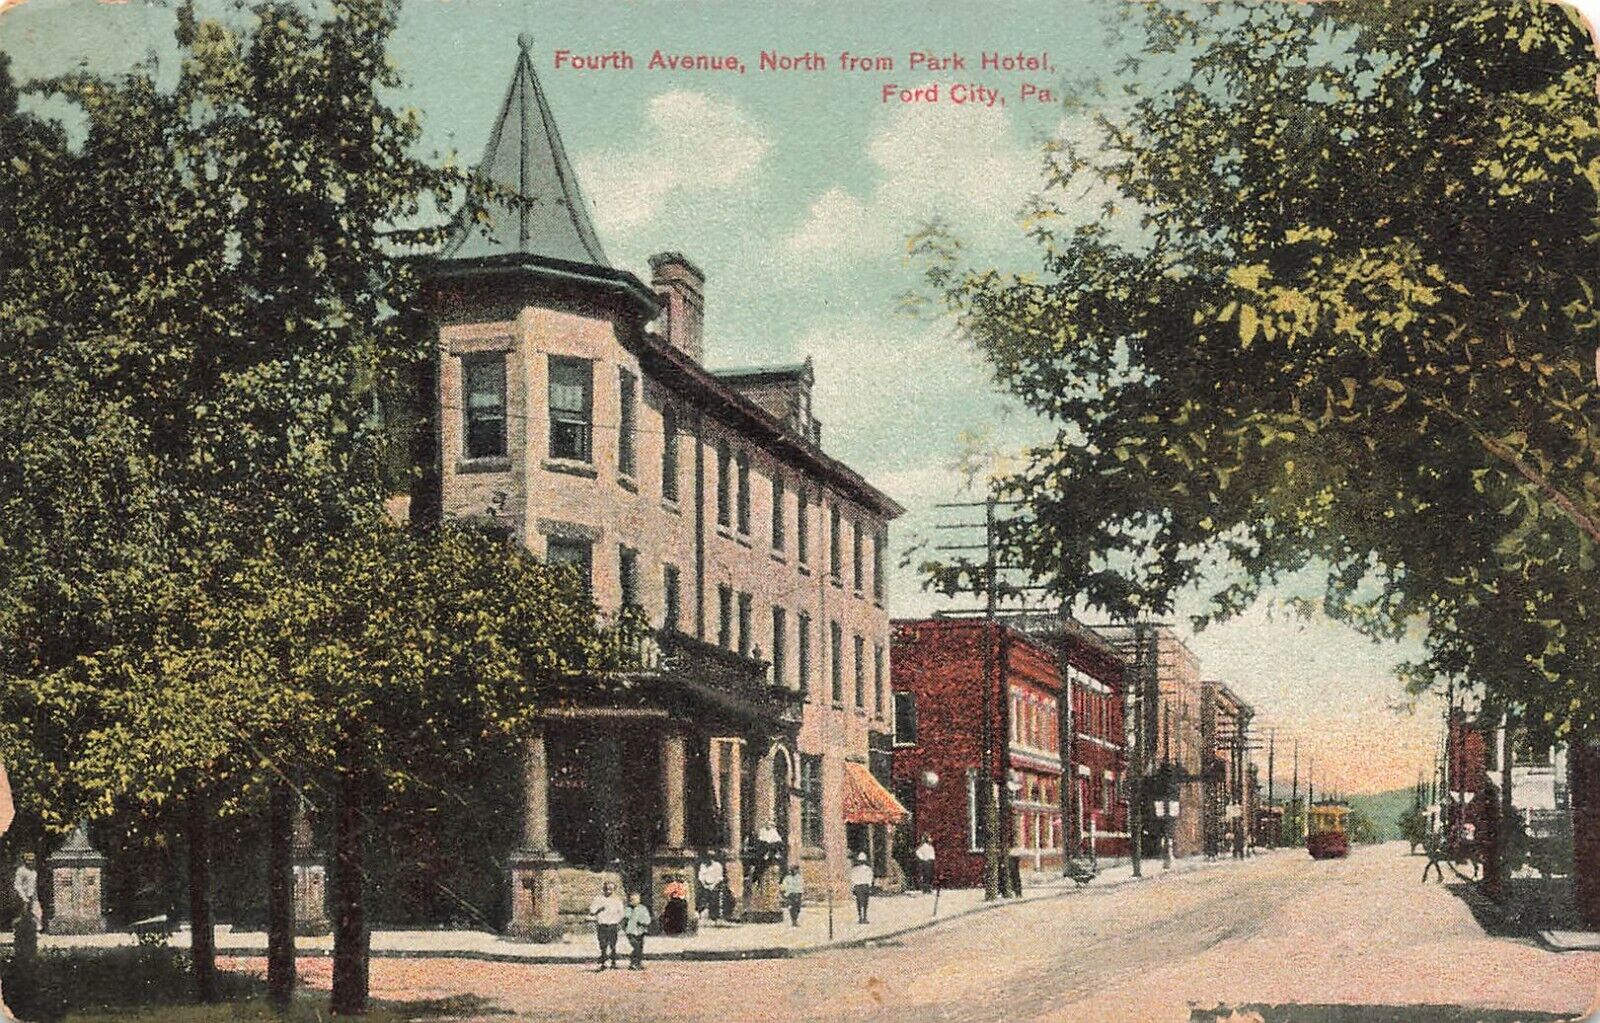 Postcard ~Ford City, Pennsylvania, 4th Ave. North from park Hotel, Streetcar